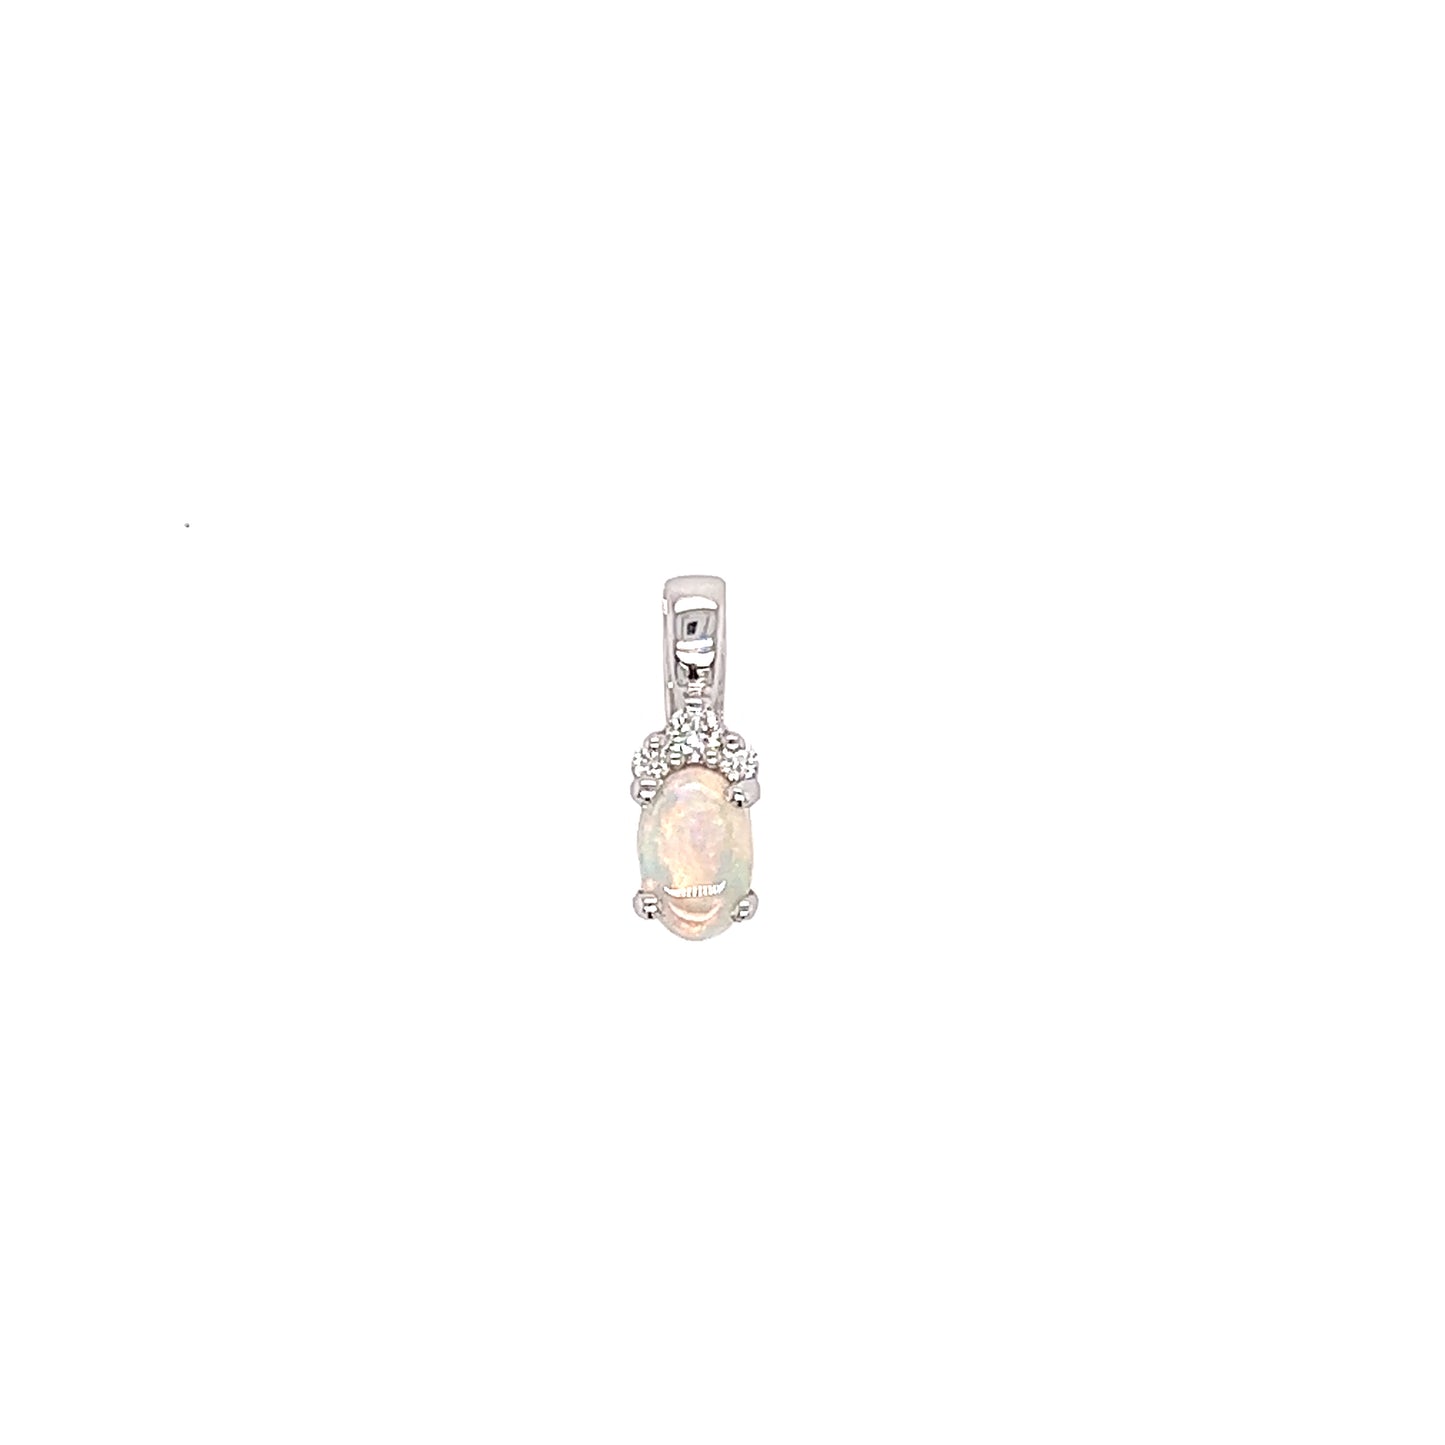 Australian White Opal with Three Diamonds in 14k White Gold Front View